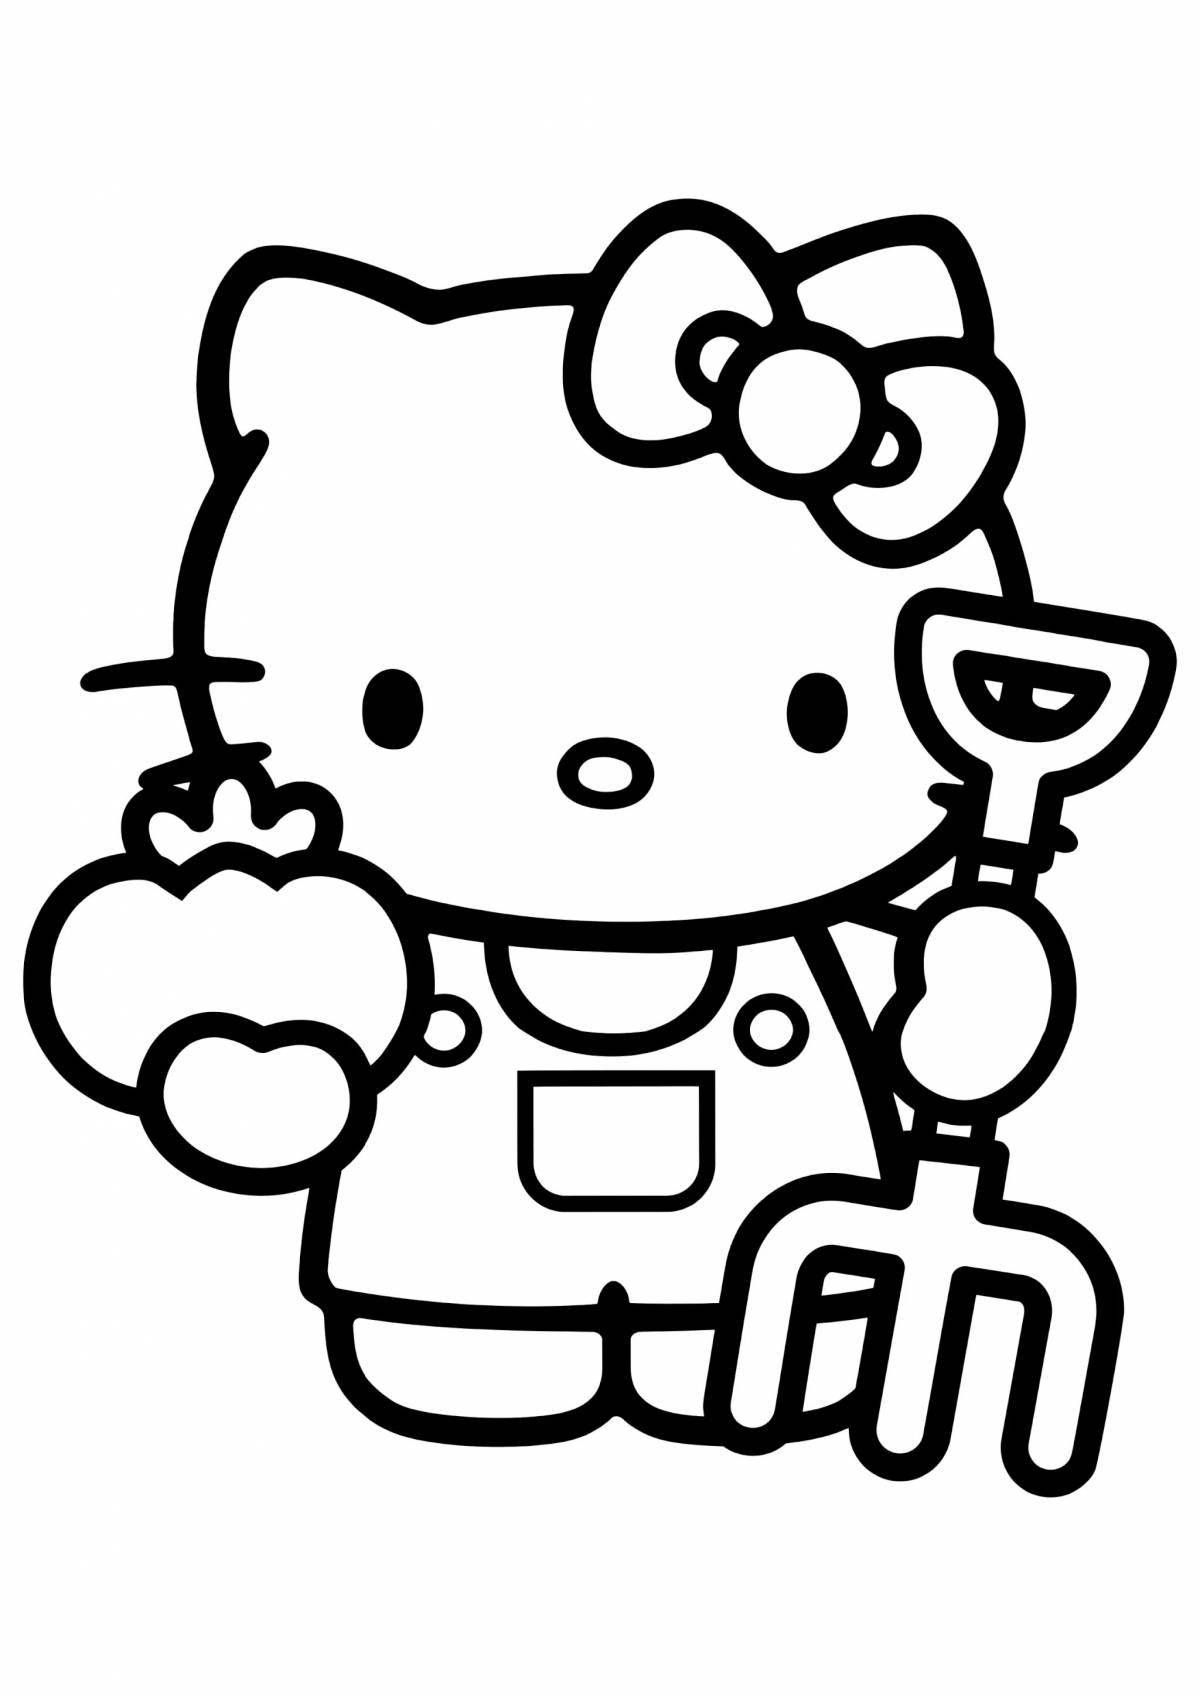 Colorful stickers hello kitty coloring book